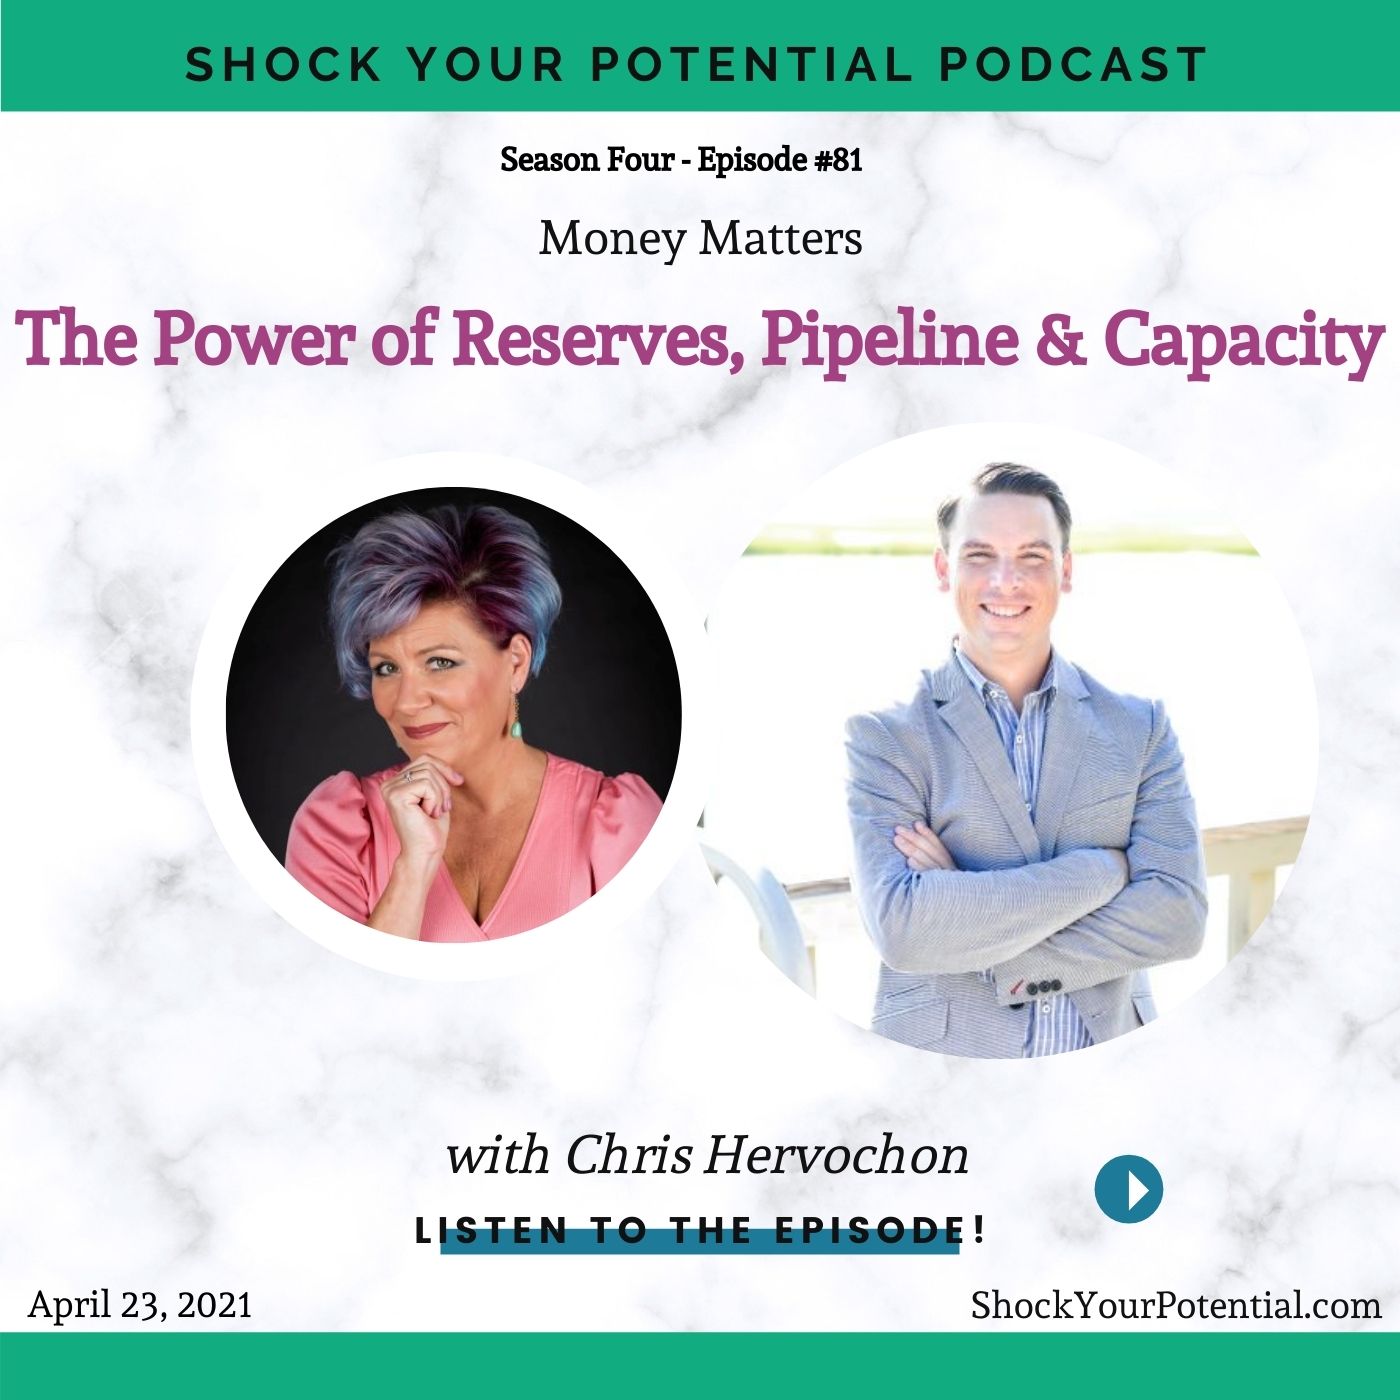 The Power of Reserves, Pipeline & Capacity – Chris Hervochon